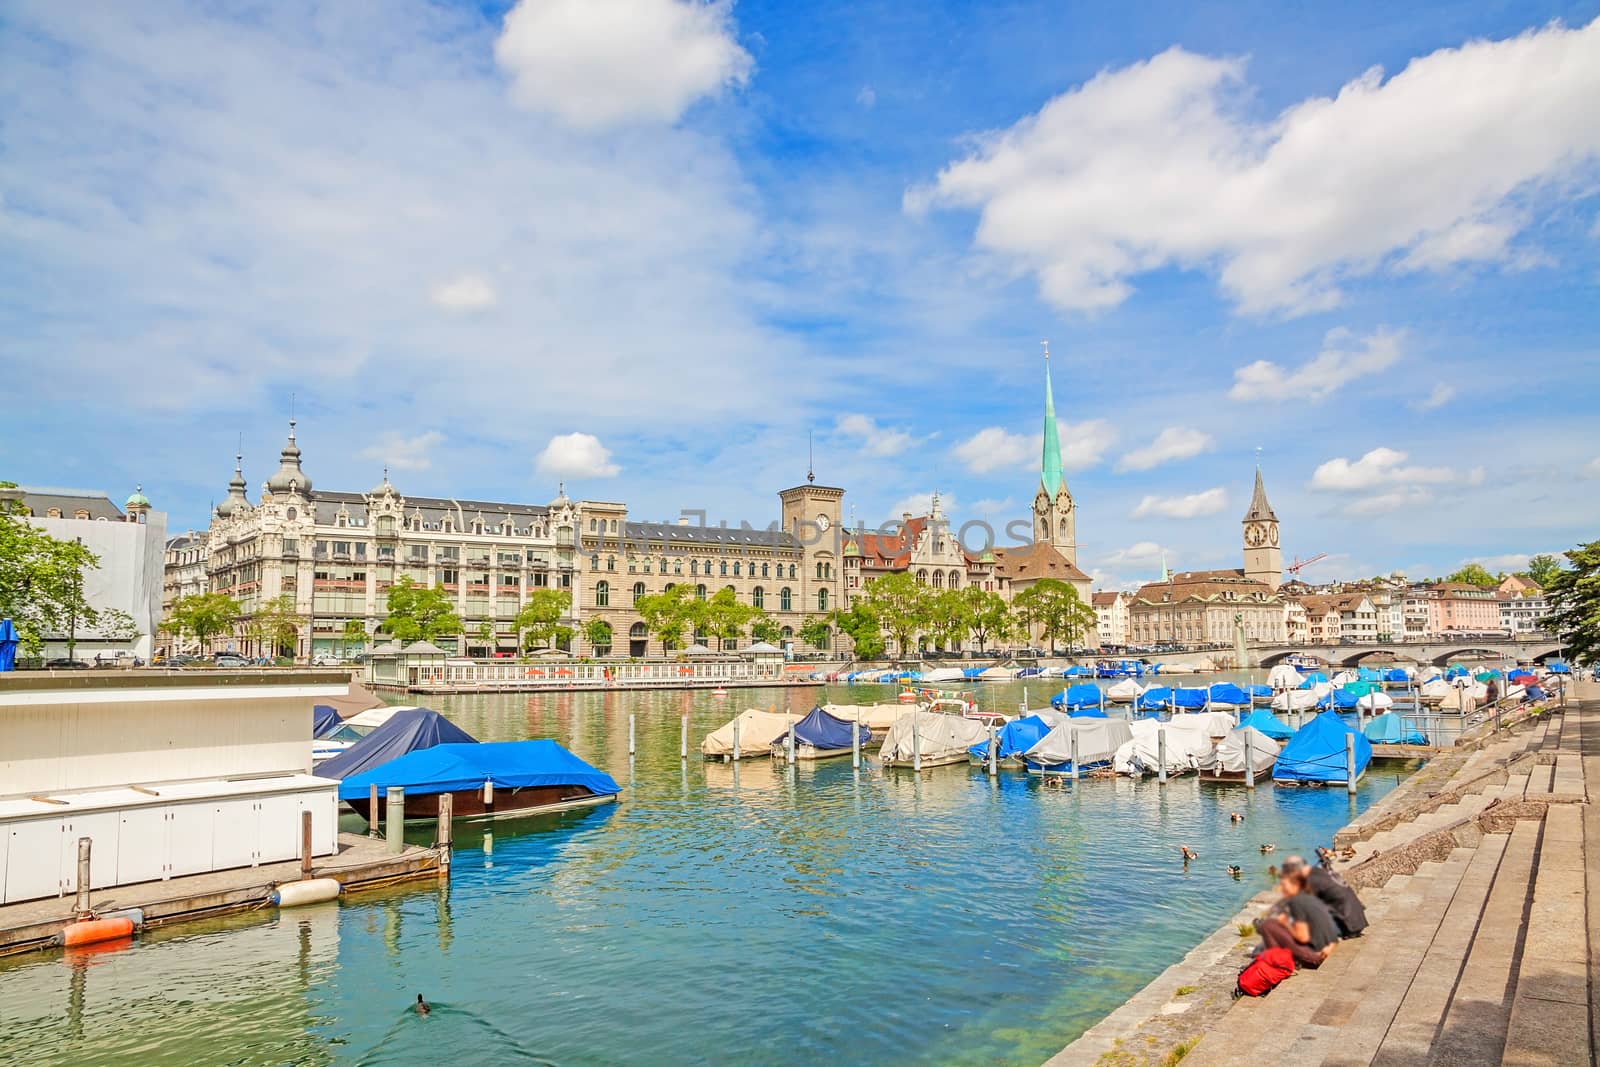 Panorama of historical part of Zurich with famous Fraumunster and St. Peter church on a beautiful summer day, Switzerland